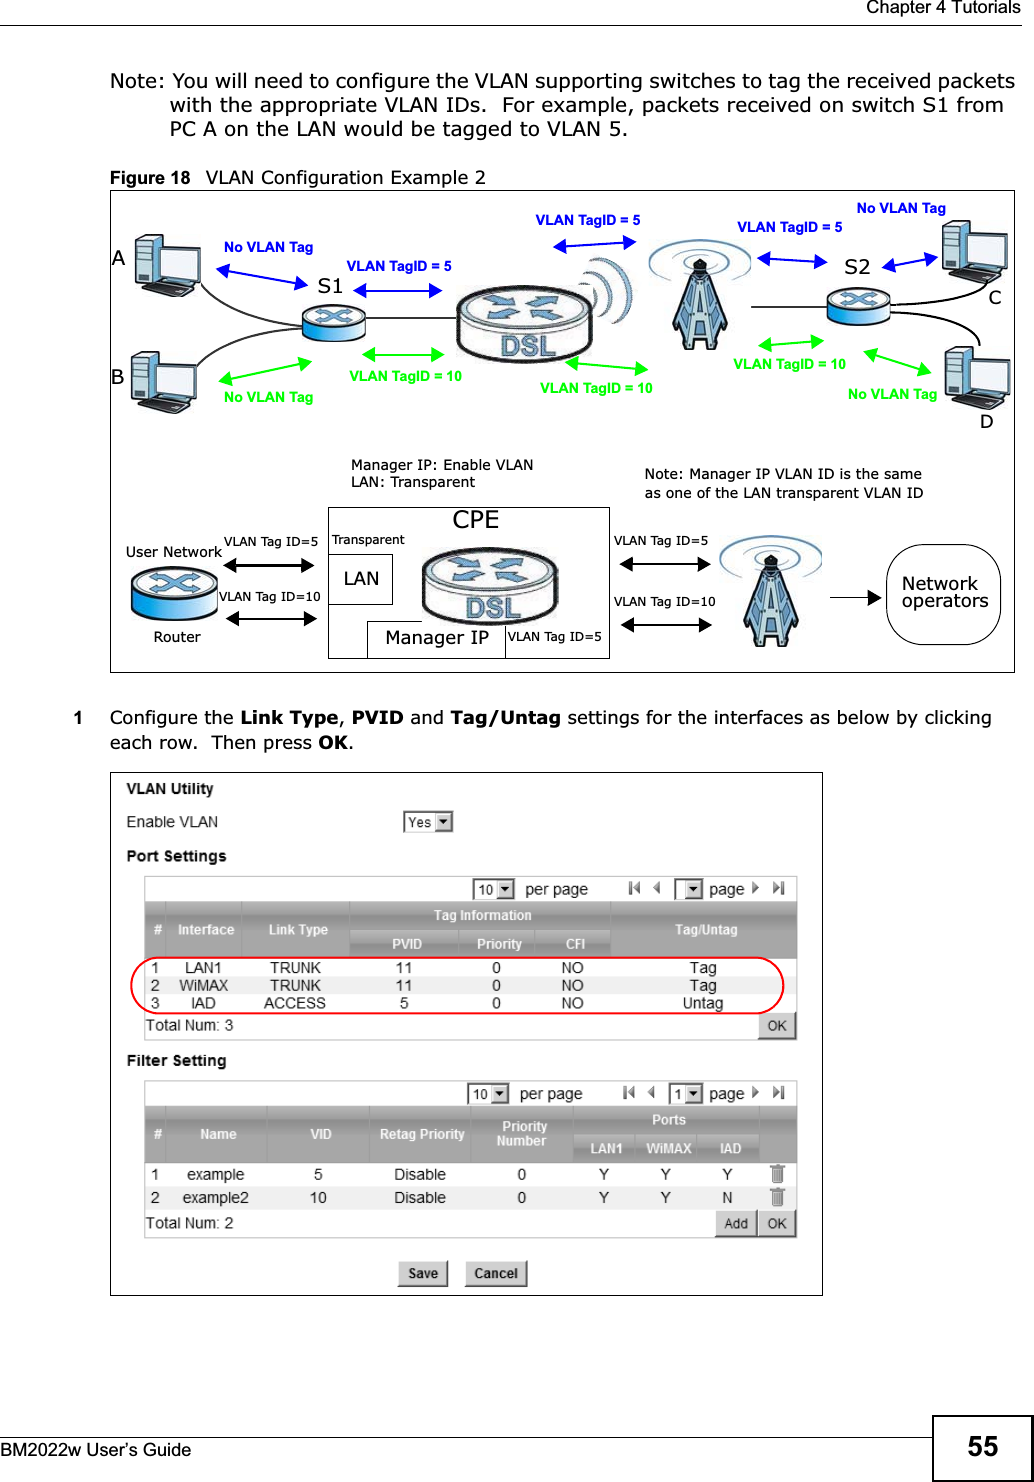  Chapter 4 TutorialsBM2022w User’s Guide 55Note: You will need to configure the VLAN supporting switches to tag the received packets with the appropriate VLAN IDs.  For example, packets received on switch S1 from PC A on the LAN would be tagged to VLAN 5.  Figure 18   VLAN Configuration Example 21Configure the Link Type,PVID and Tag/Untag settings for the interfaces as below by clicking each row.  Then press OK.VLAN TagID = 5VLAN TagID = 10ABNo VLAN TagNo VLAN TagVLAN TagID = 5VLAN TagID = 5VLAN TagID = 10VLAN TagID = 10 No VLAN TagNo VLAN TagCDS1 S2CPELANManager IPUser NetworkRouterManager IP: Enable VLAN LAN: TransparentNetworkoperatorsTransparentNote: Manager IP VLAN ID is the same as one of the LAN transparent VLAN IDVLAN Tag ID=5VLAN Tag ID=5VLAN Tag ID=10 VLAN Tag ID=10VLAN Tag ID=5